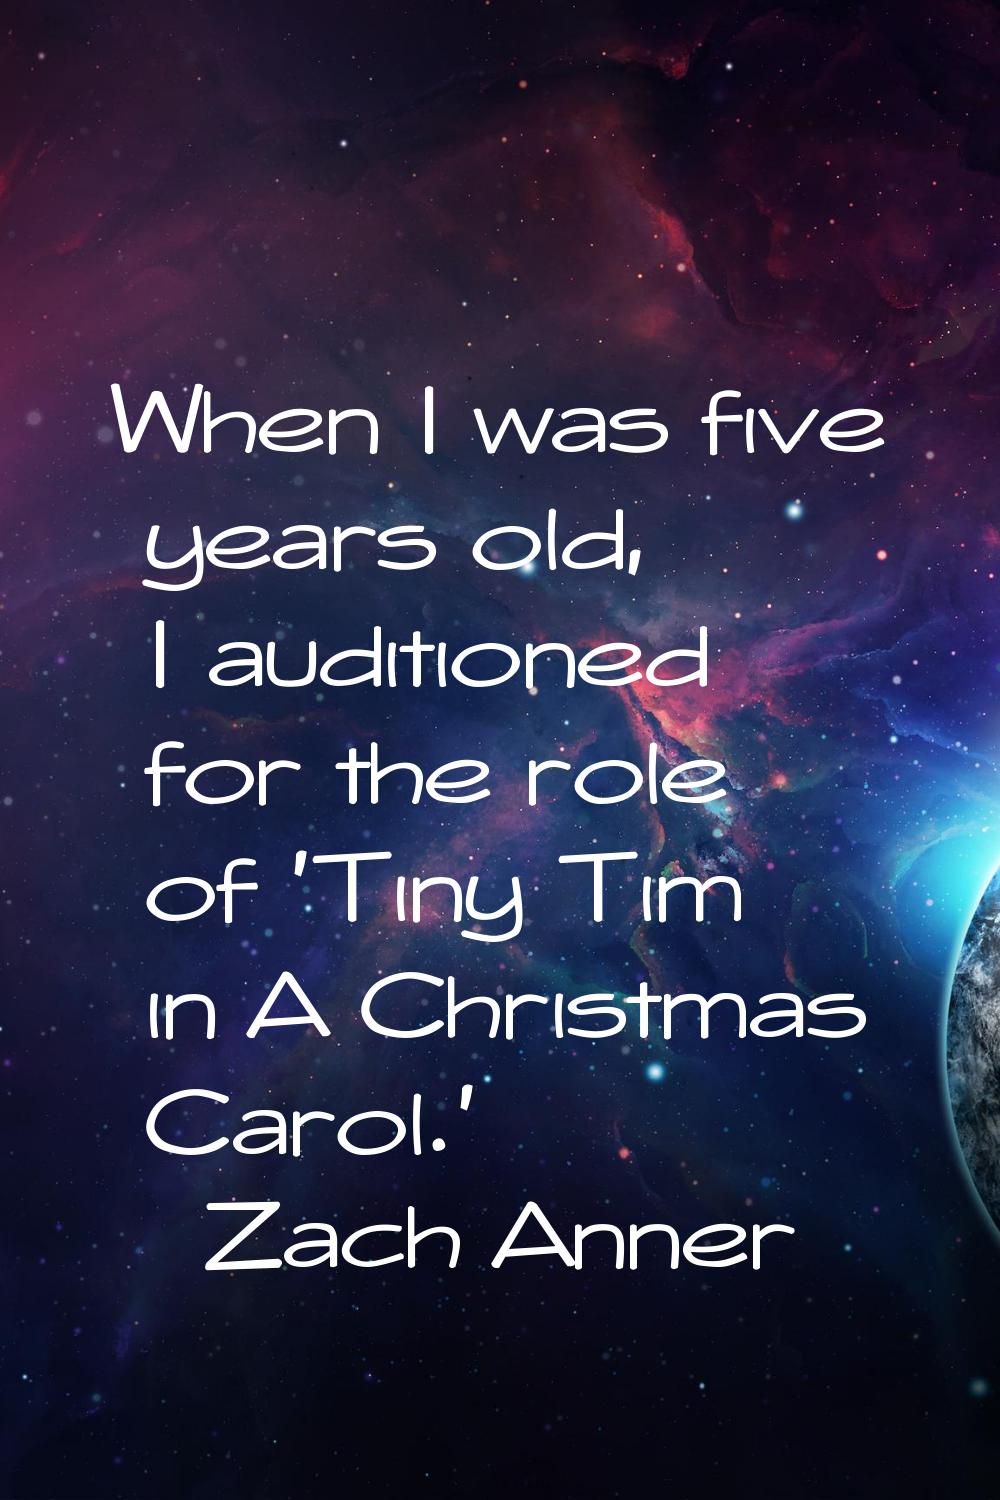 When I was five years old, I auditioned for the role of 'Tiny Tim in A Christmas Carol.'